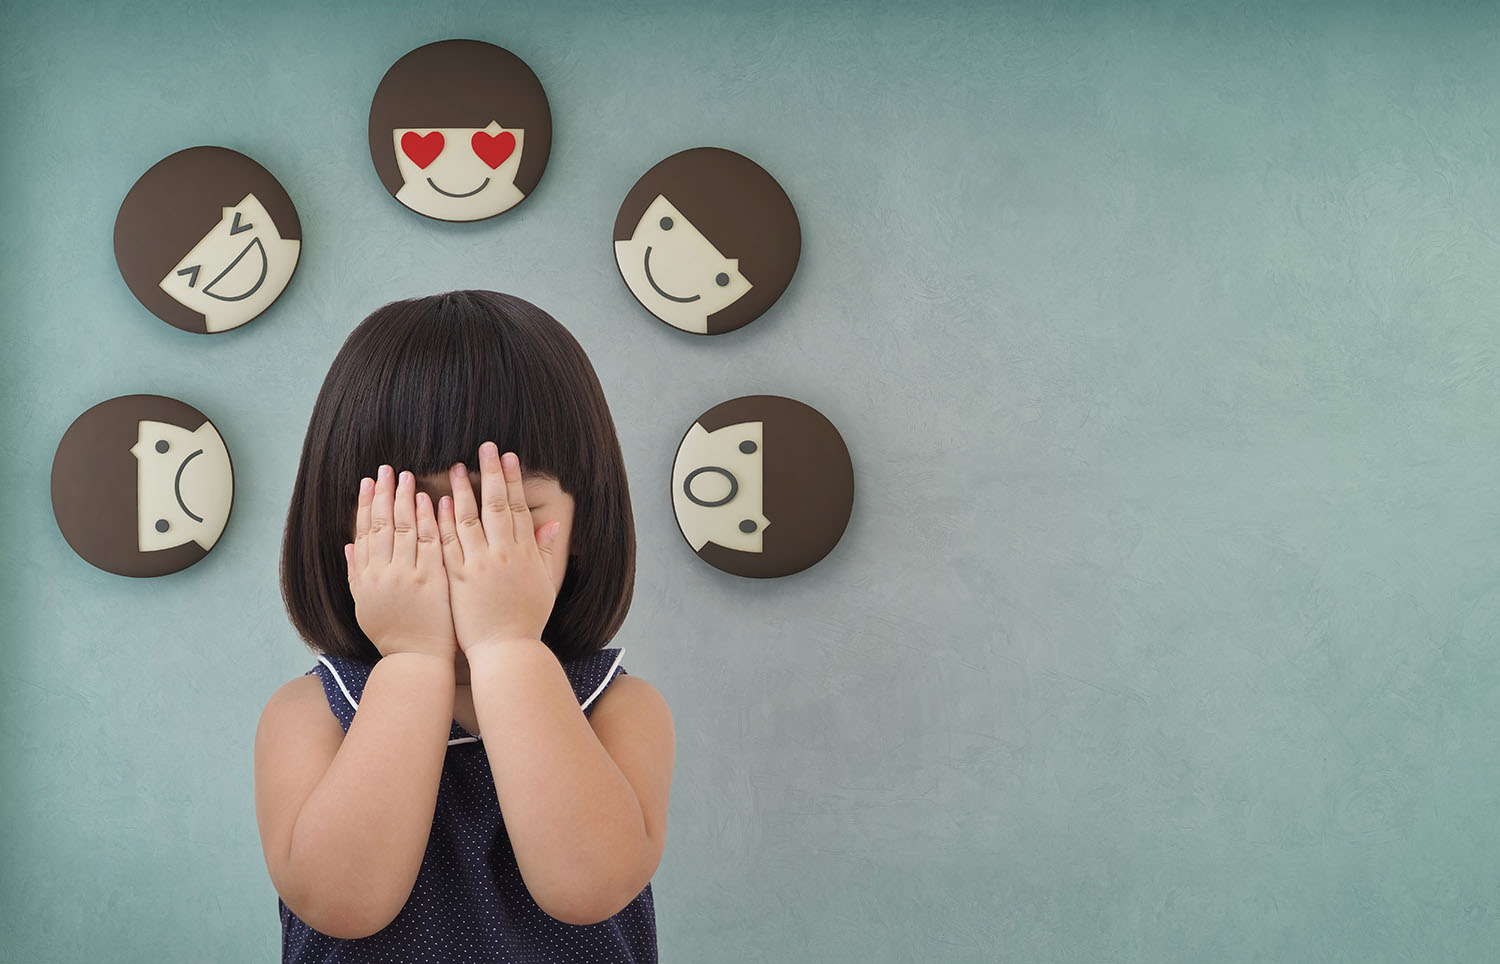 A young girl holding her hands over her face with different emotions surrounding her head.